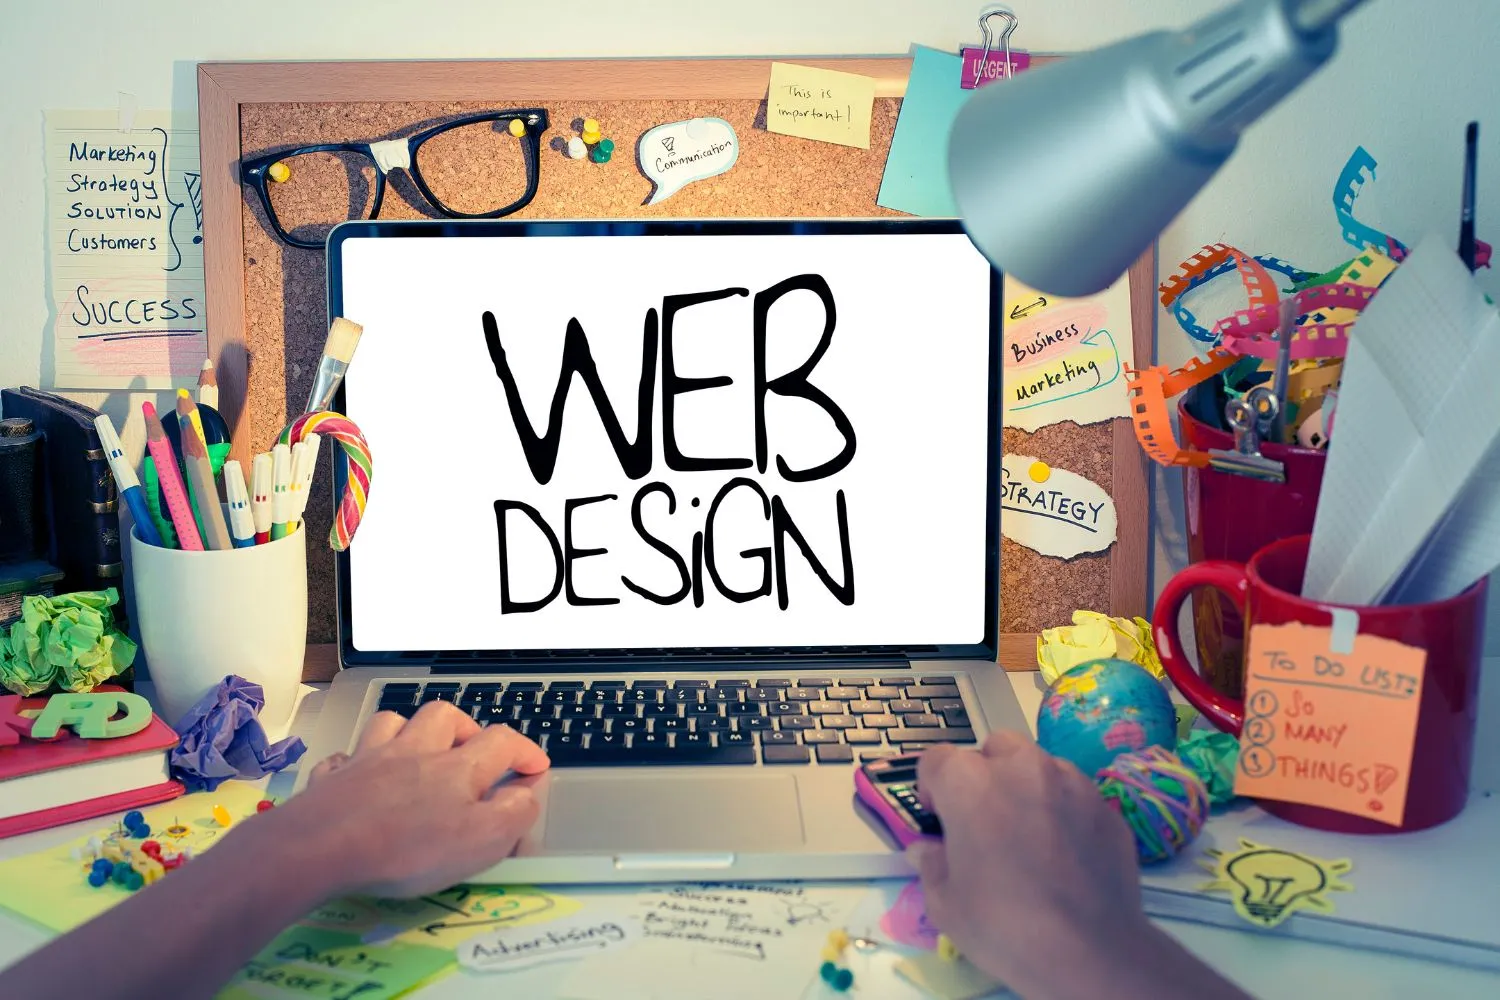 Don't DIY Your Website: Here's Why You Should Hire a Professional Web Designer